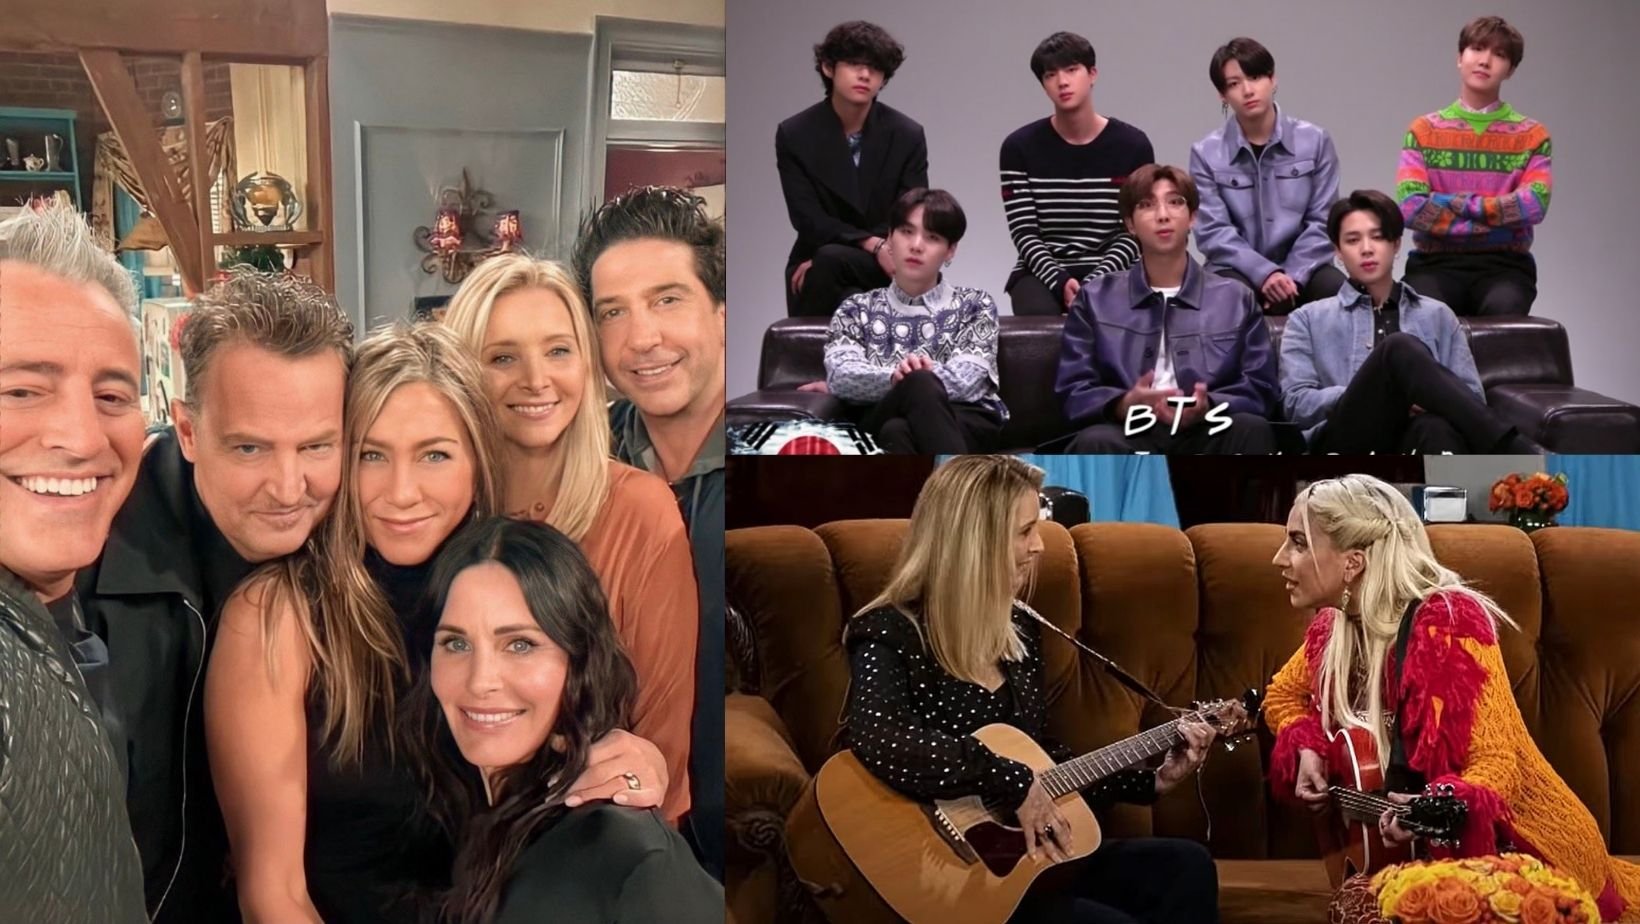 1 154.jpg?resize=412,232 - Here’s Why BTS, Lady Gaga & Justin Bieber Scenes Were Cut From ‘Friends’ Reunion Episode In China